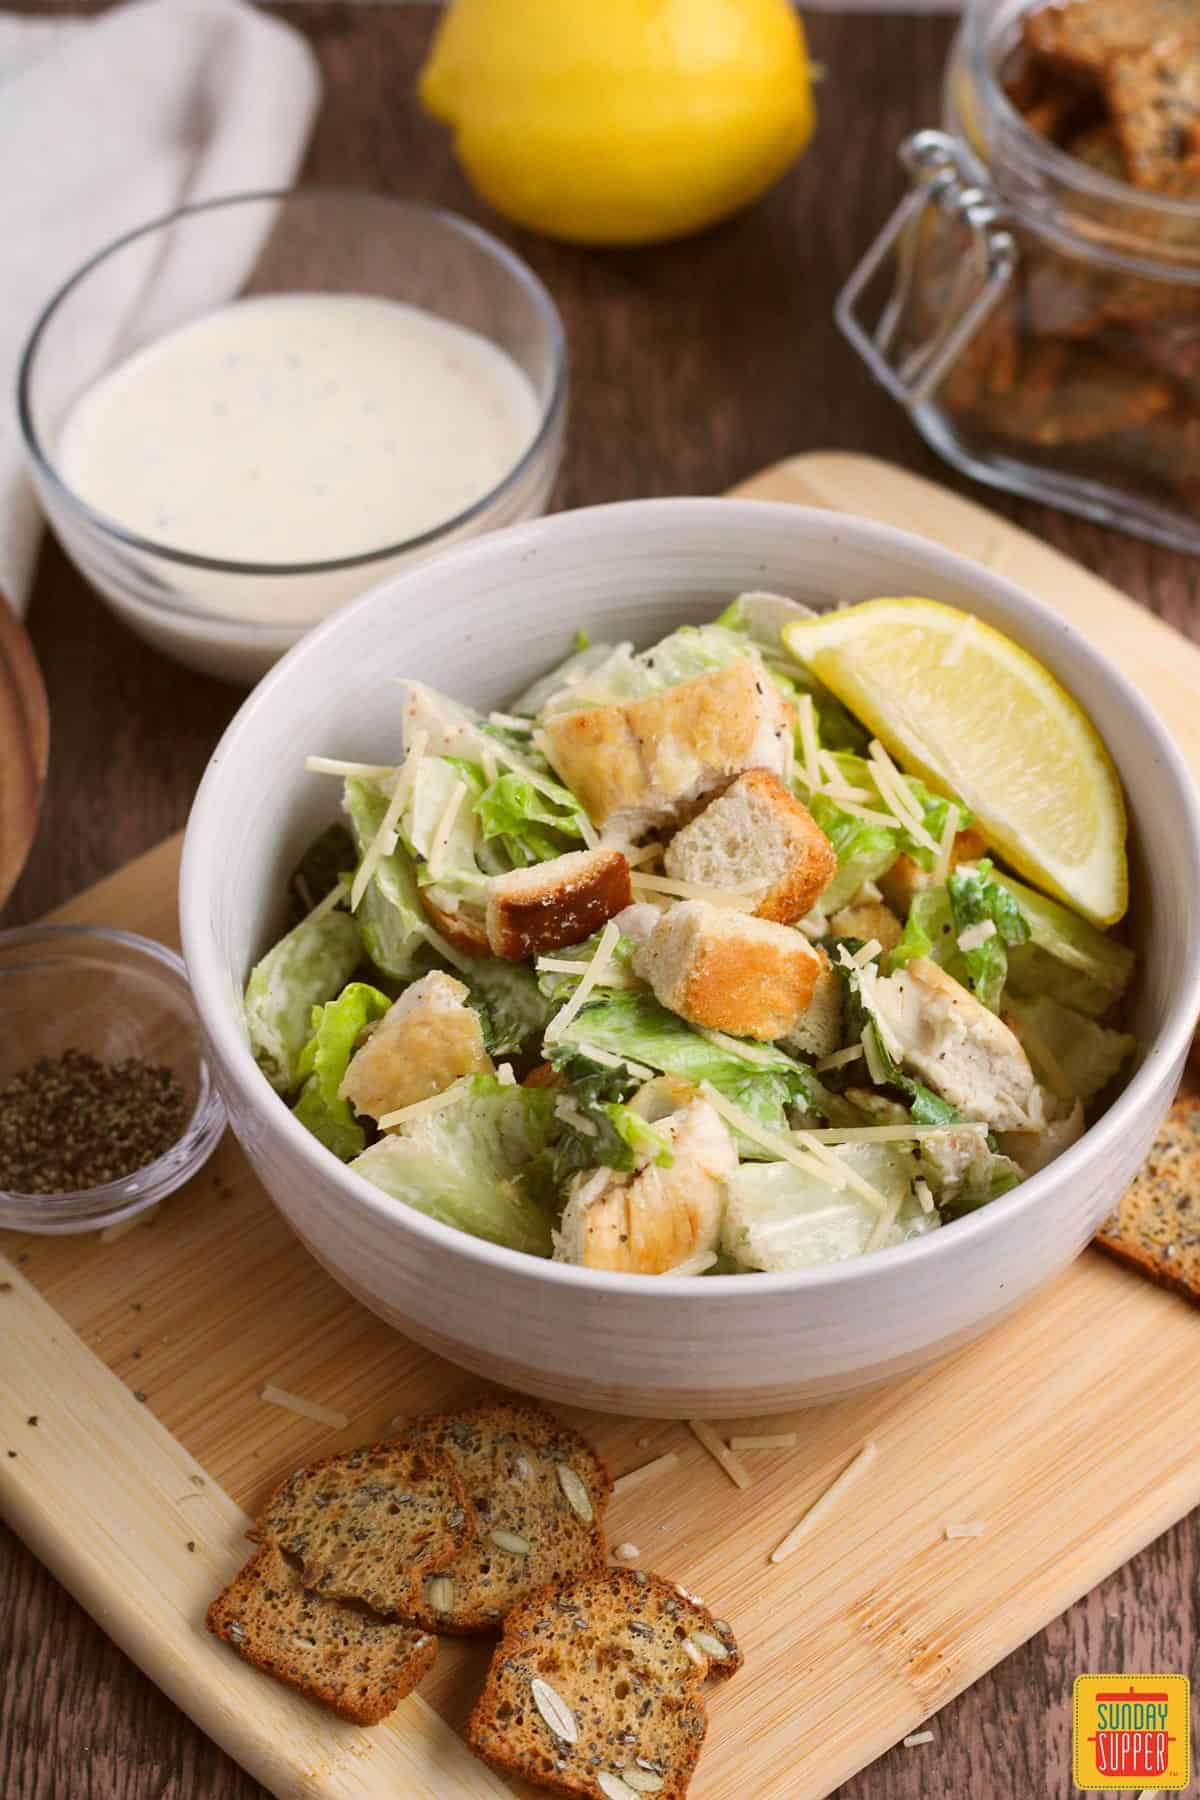 a cutting board with crouton slices, salad, pepper, dressing, and a lemon